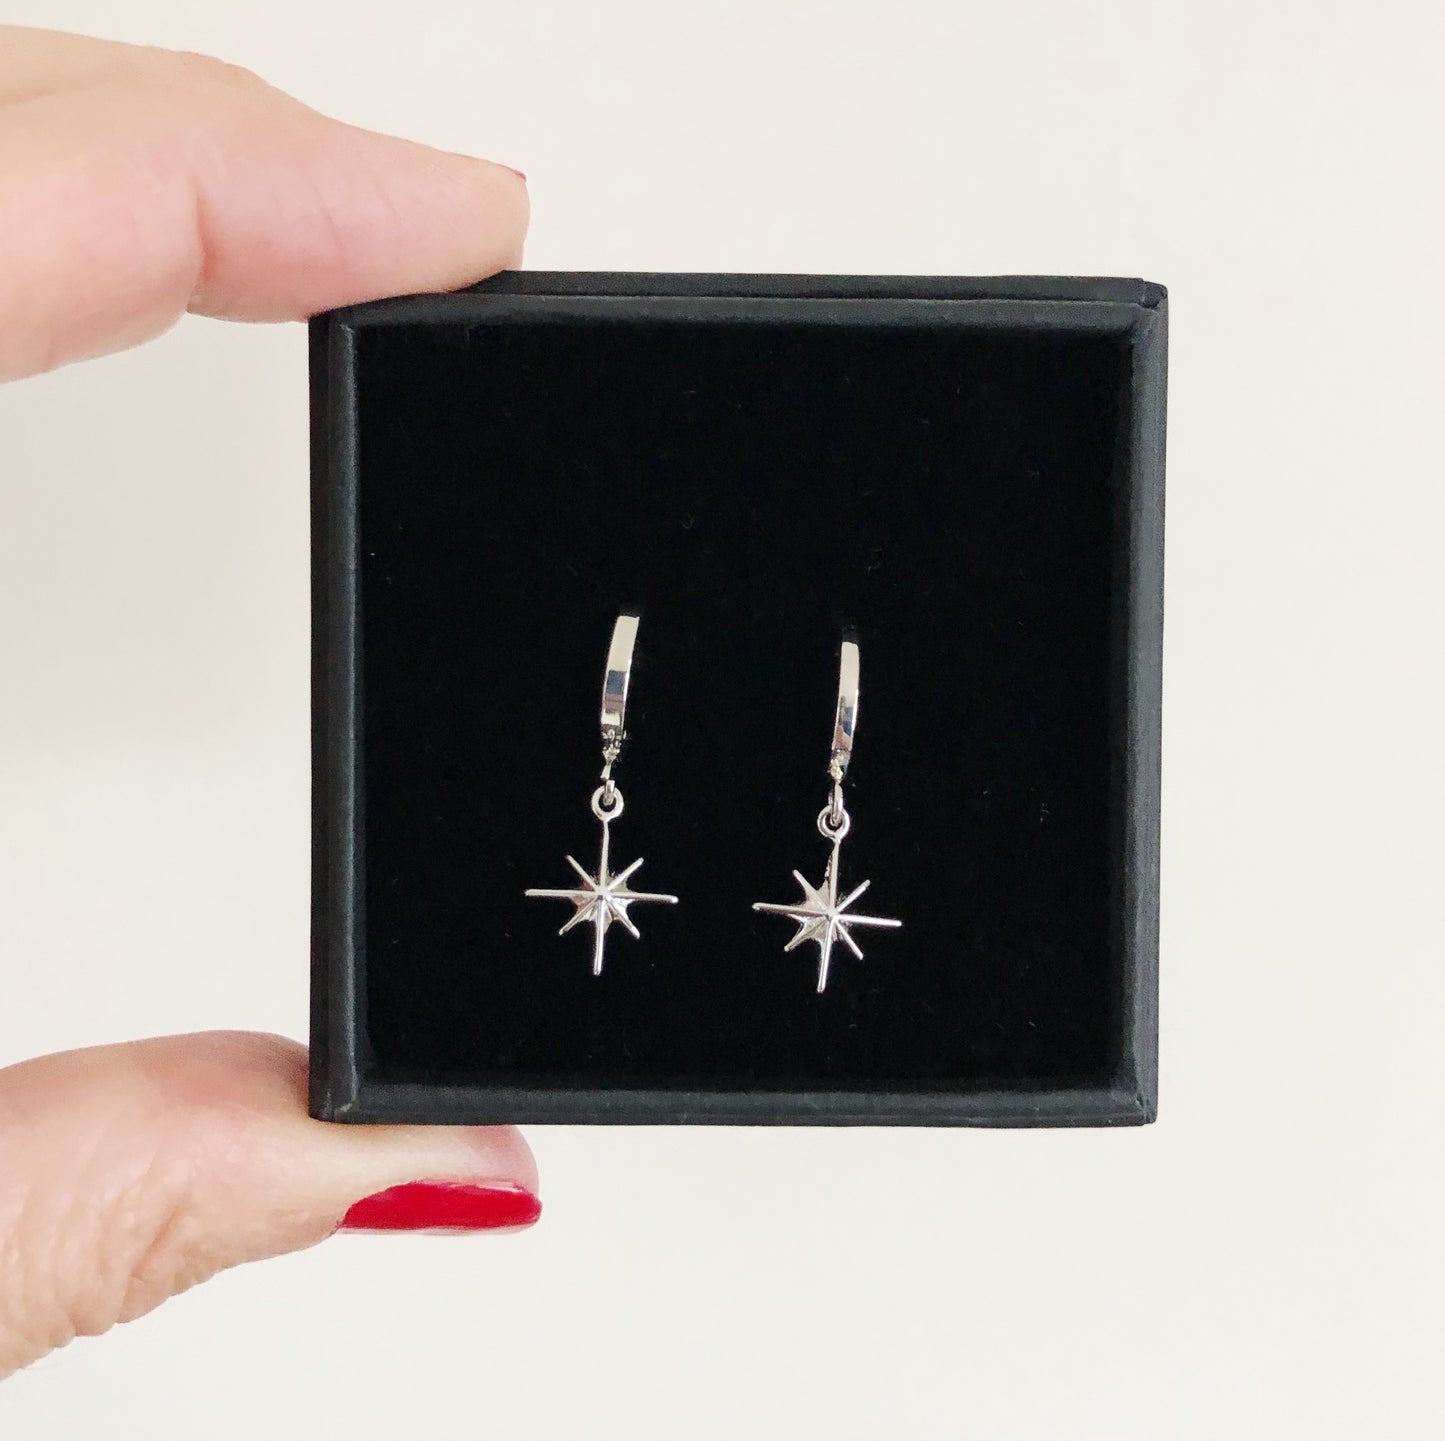 North star mini hoops in silver